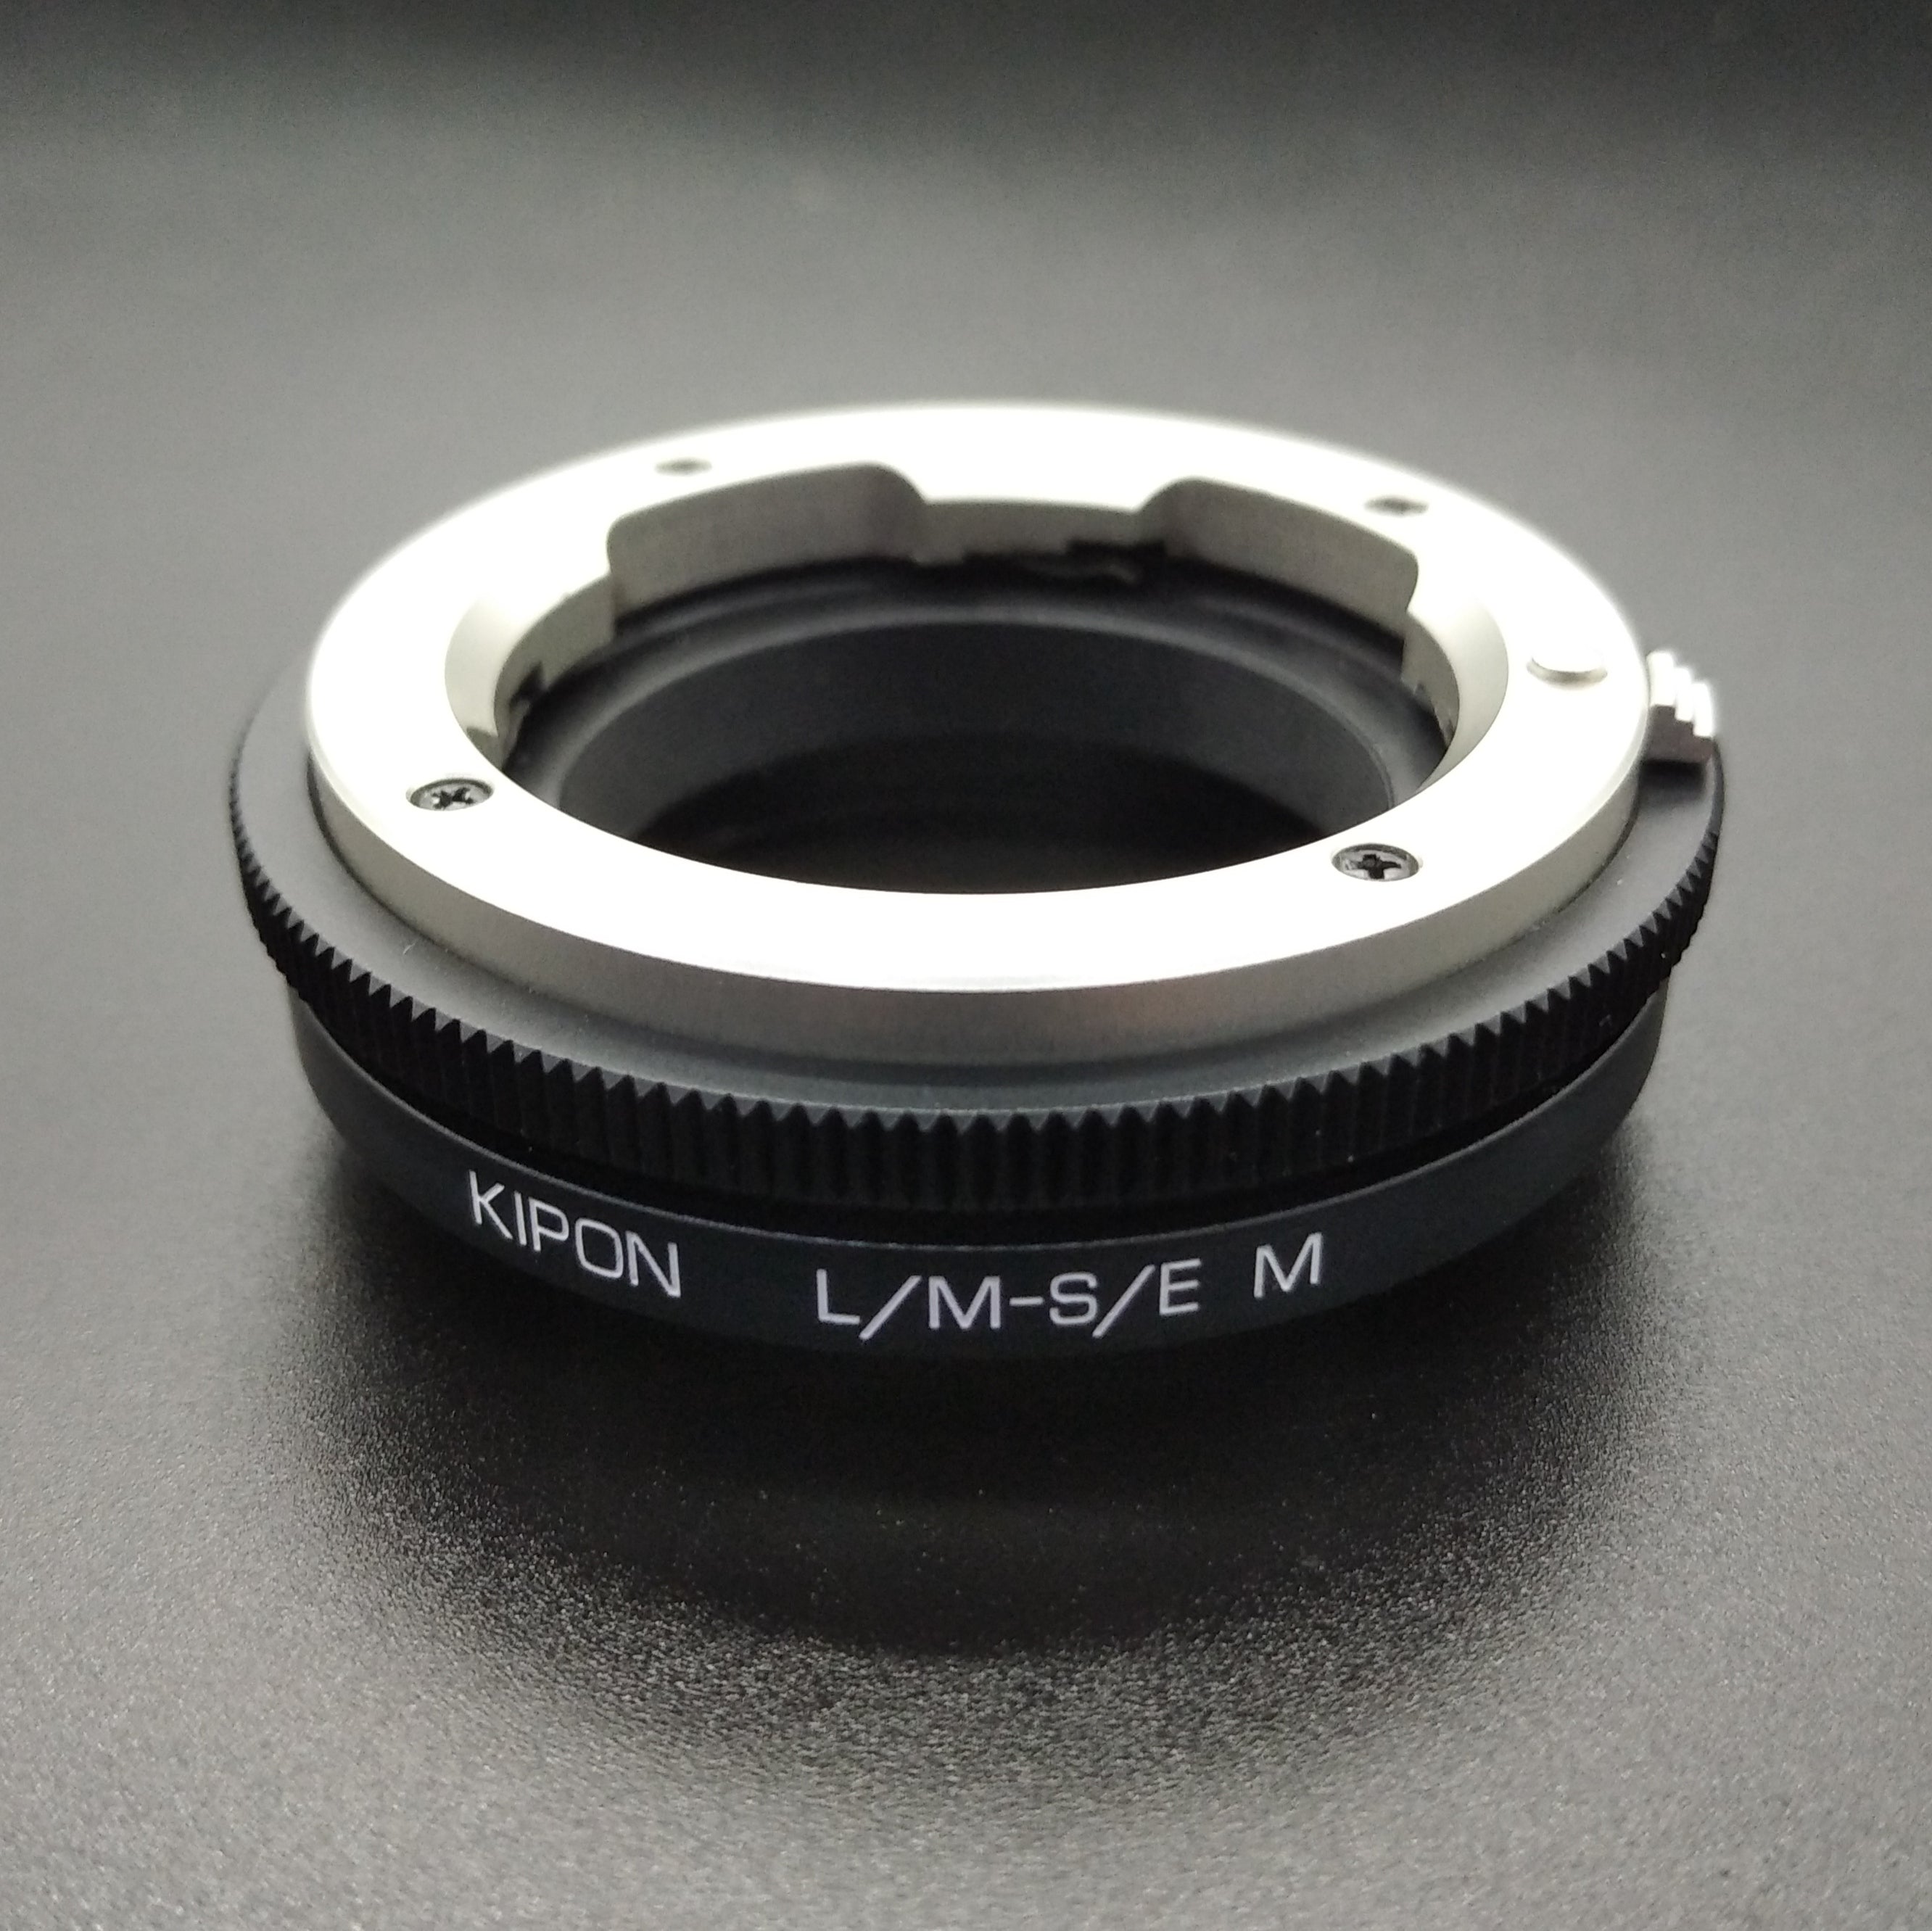 Kipon Leica M L/M mount lens to Sony NEX E mount mirrorless camera adapter - macro helicoid ring - A7 A7R IV V A7S III A6000 A6500 A5000